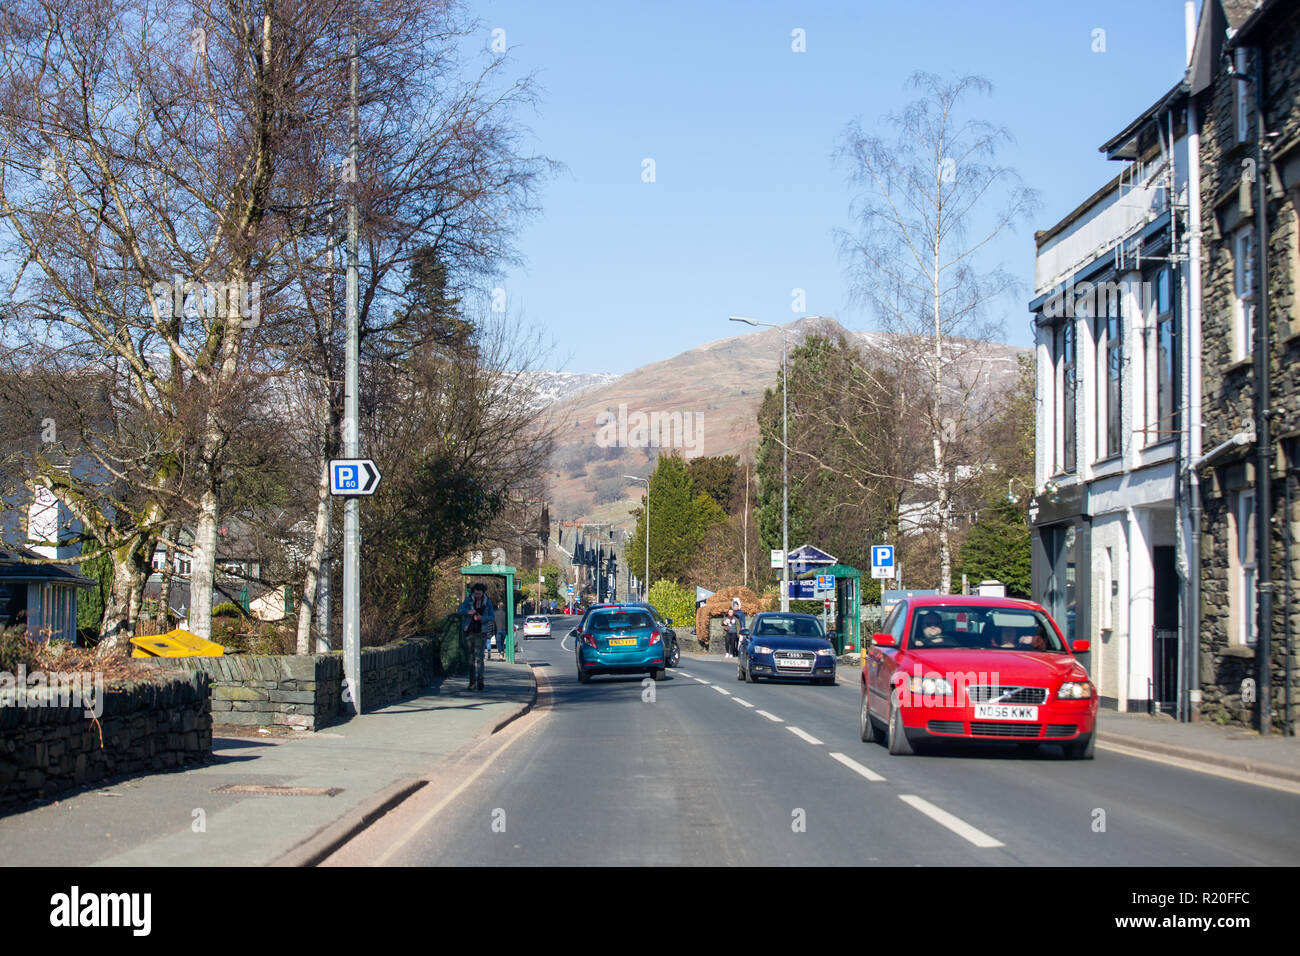 Grasmere/England - February 25th 2018: Drving through Grasmere roads in the Lake District Stock Photo